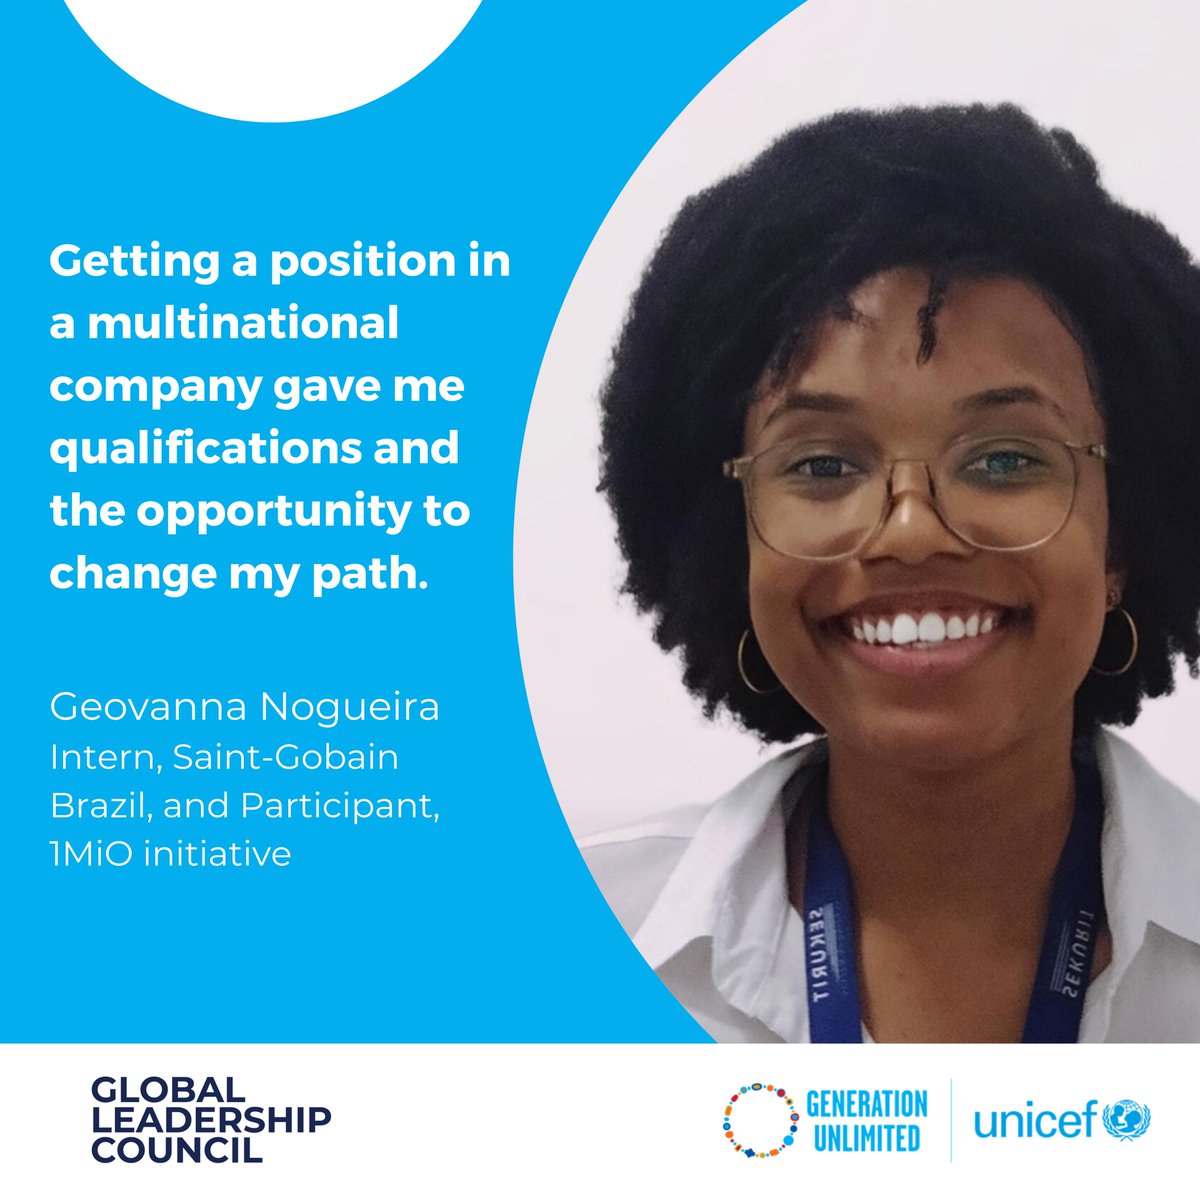 Geovanna's journey highlights opportunity and inclusion. Despite challenges, she found hope as a young apprentice at @SaintGobain. Her story emphasizes meaningful work for youth. Through @UNICEFBrasil's #1MiO platform and the Public-Private-Youth partnership, we empower youths.